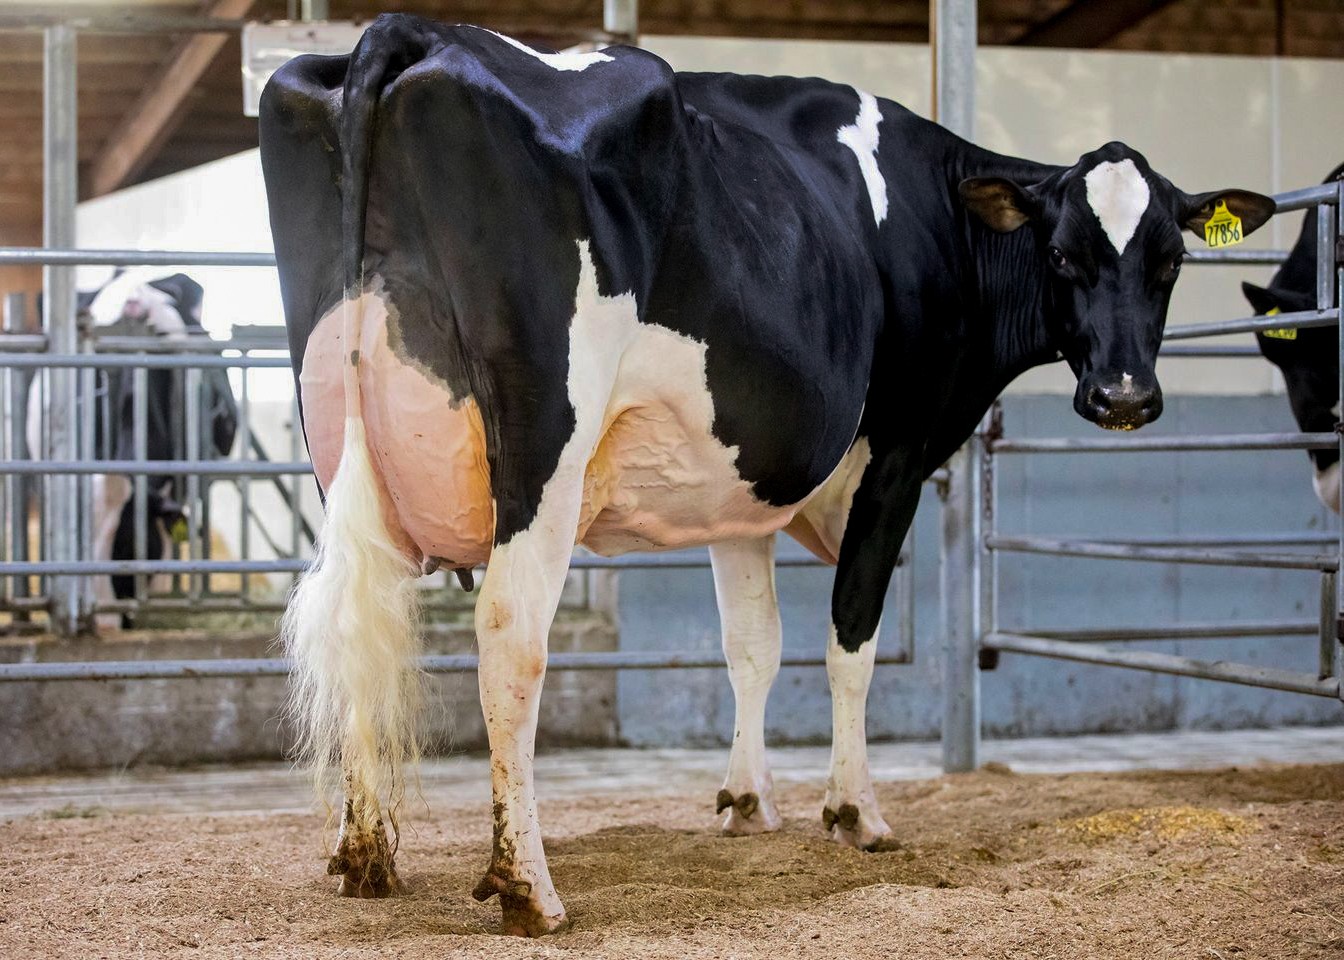 Mother Orono (global cow of the year 2023) 